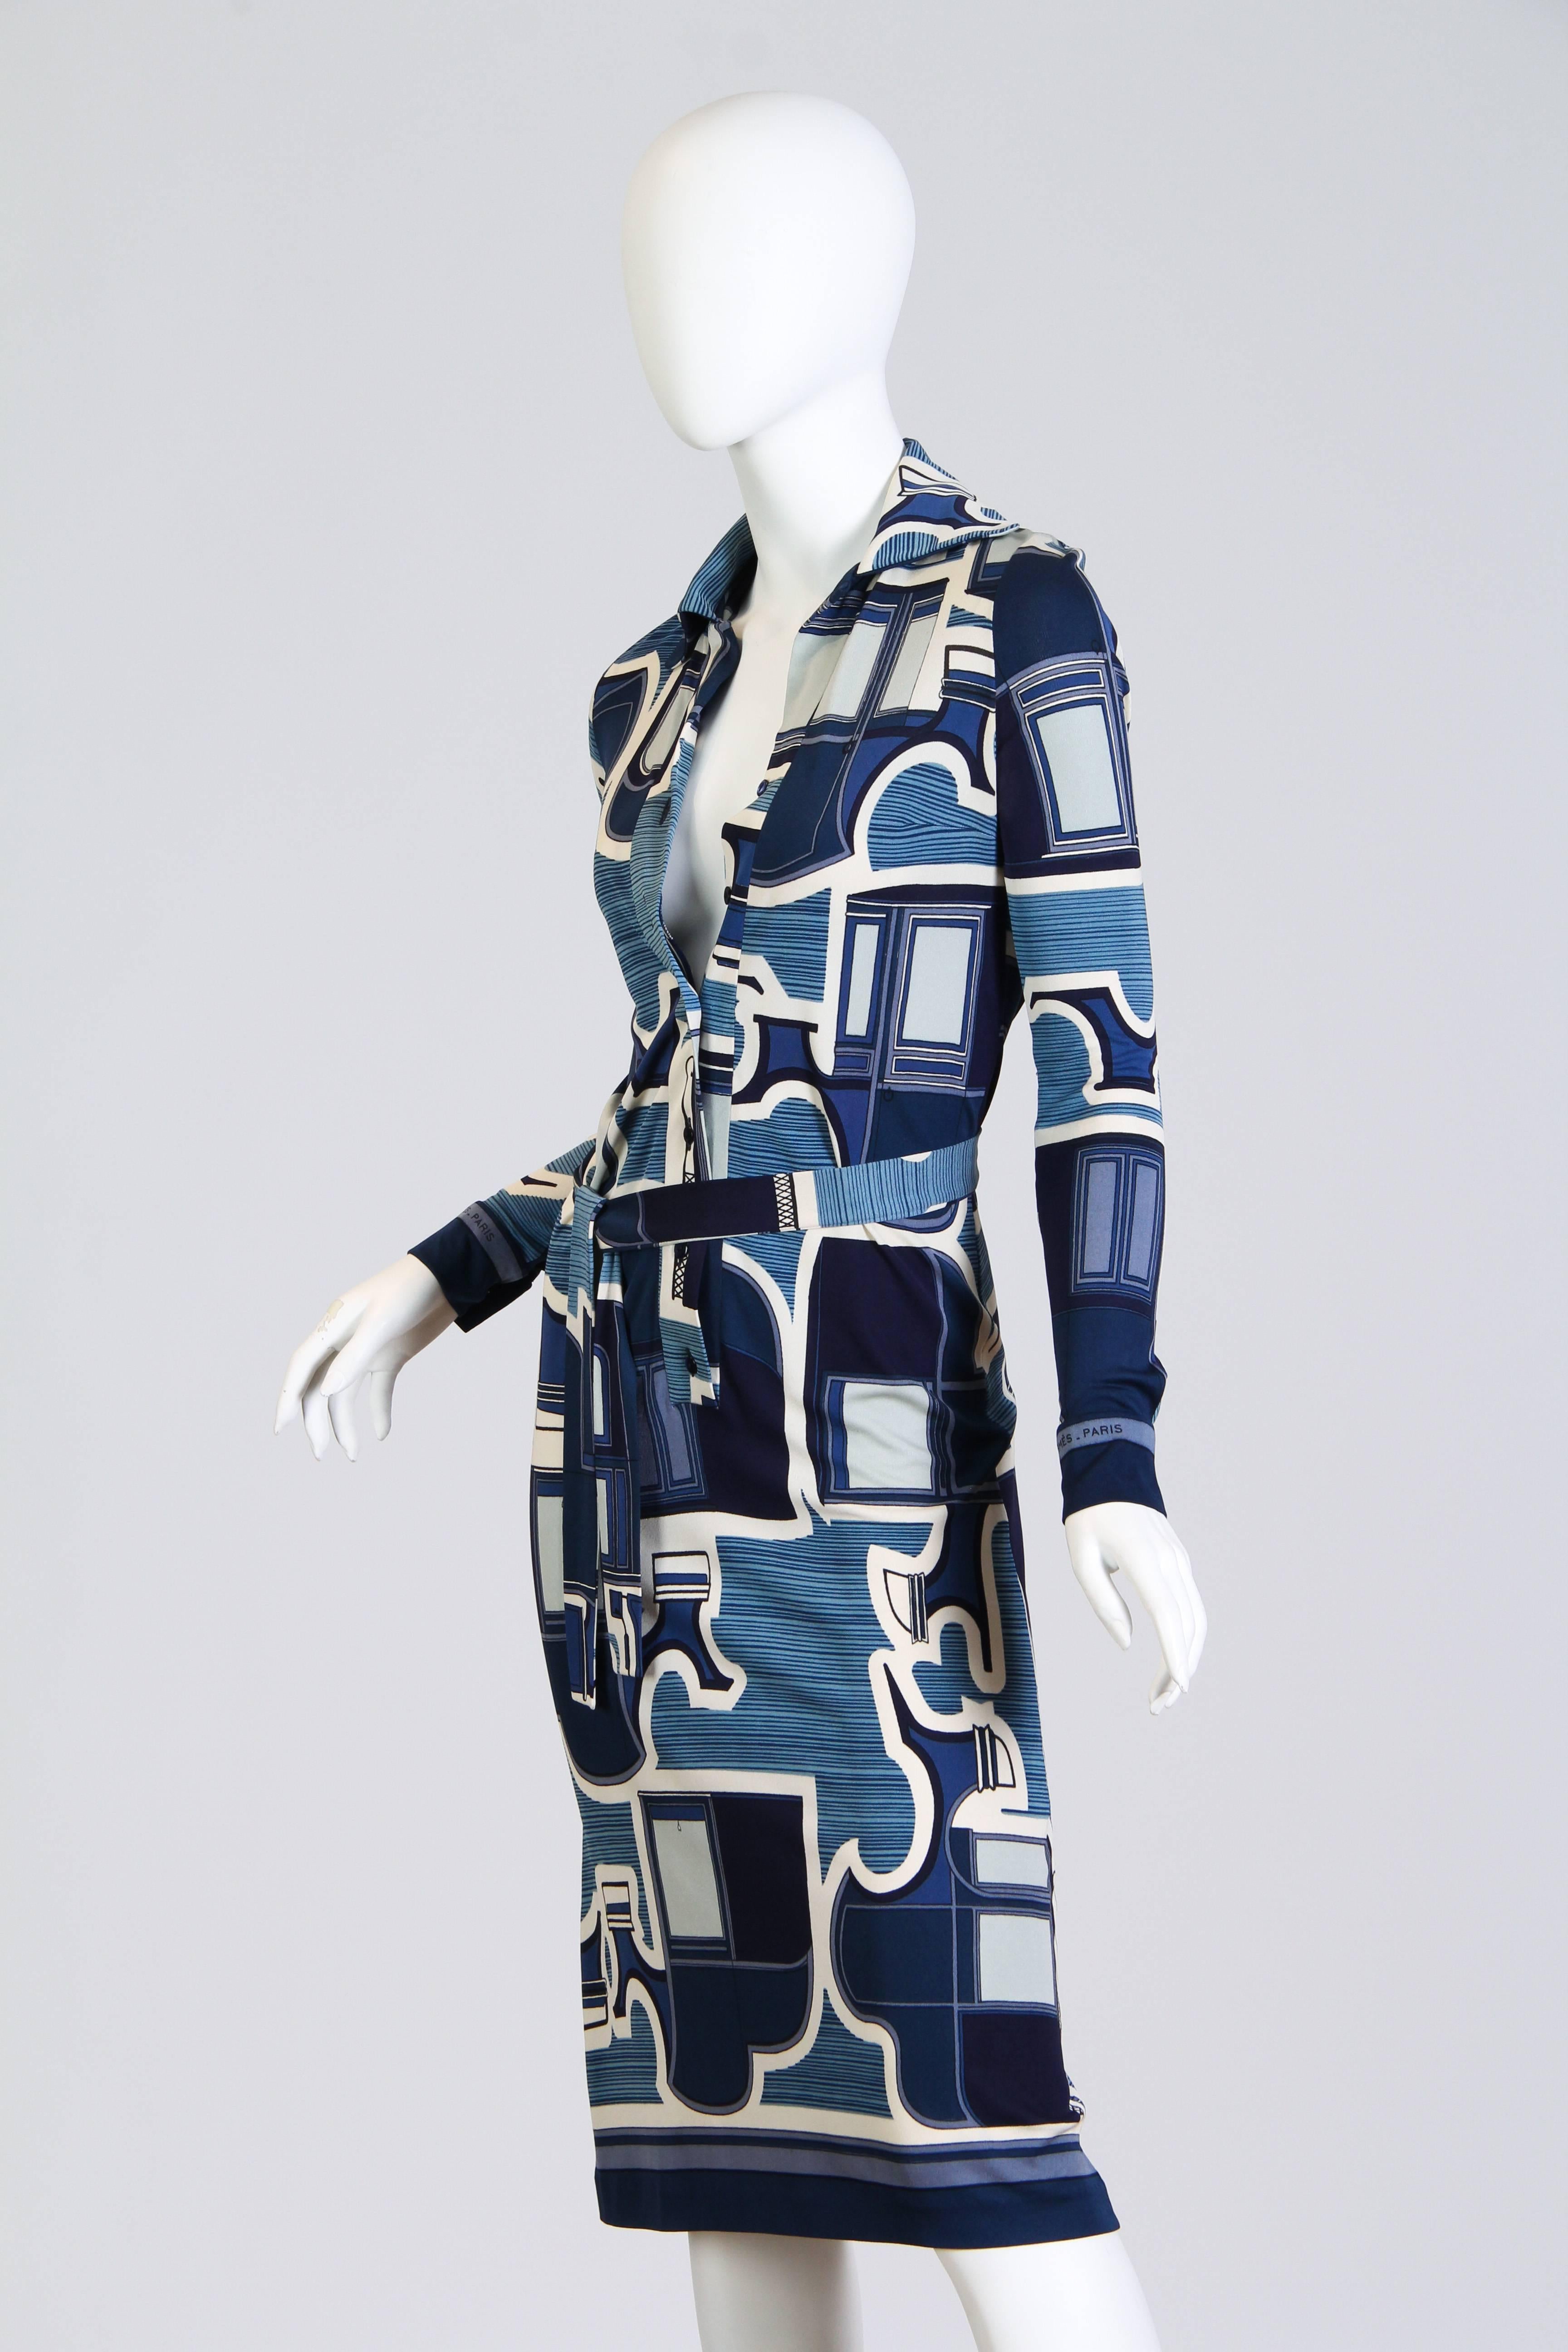 Gorgeous 1970s dress in silk jersey from the esteemed house of Hermes. This dress is a great marriage of the disco era and the house's taste for historicism. Look closely and you'll see that the print is an abstraction of the 18th century sedan. Fit